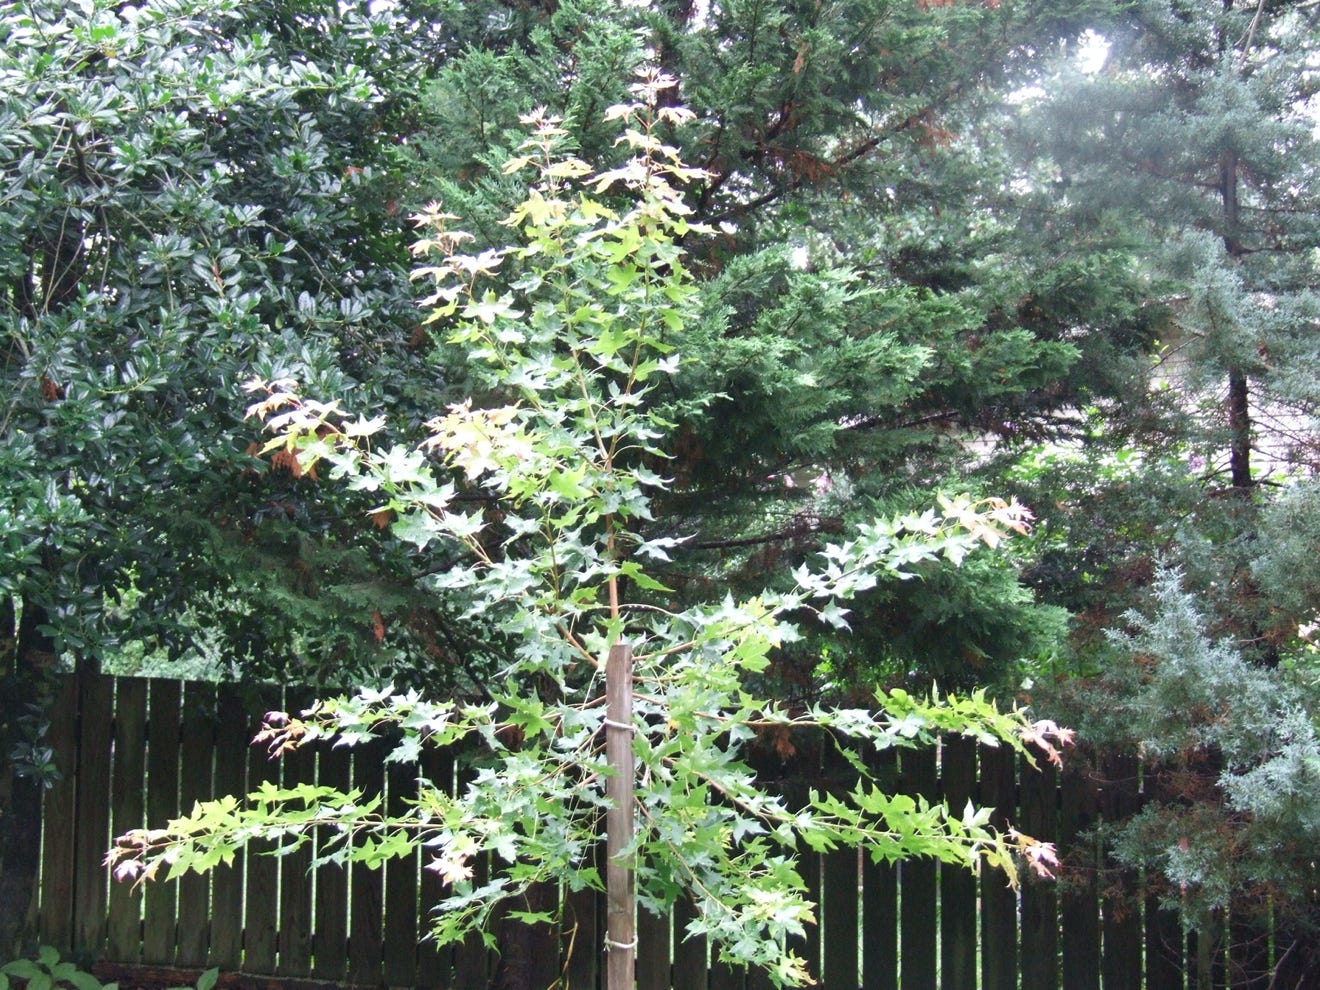 Young Acer truncatum Fire Dragon Shantung maple in June following the devastating Easter 2007 freeze in Arkansas.